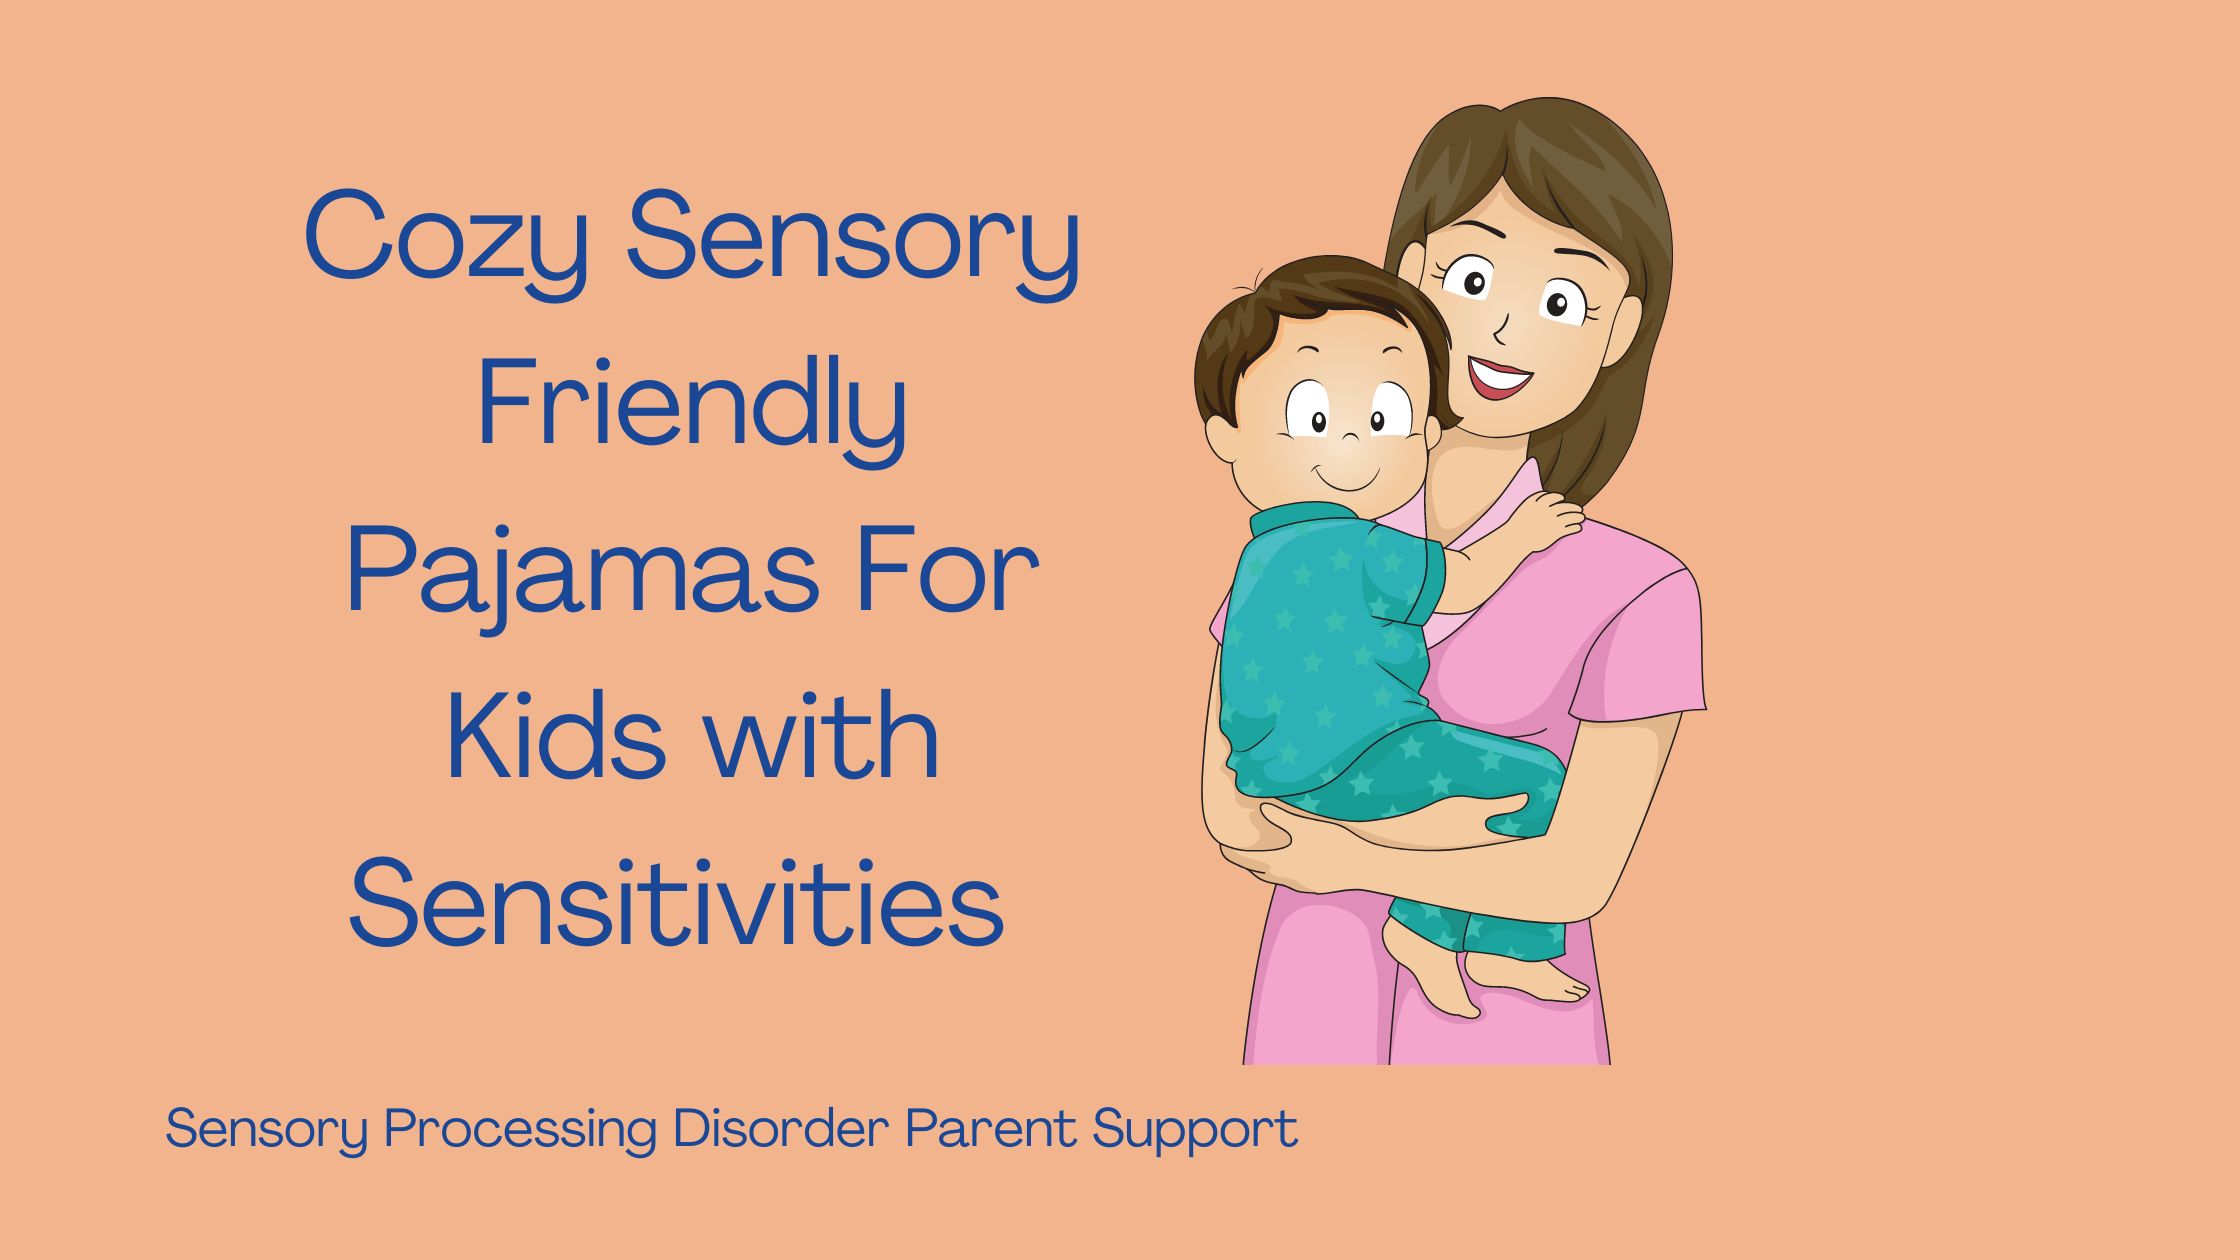 mother and child who has sensory processing disorder wearing sensory friendly pj's Cozy Sensory Friendly Pajamas For Kids with Sensitivities